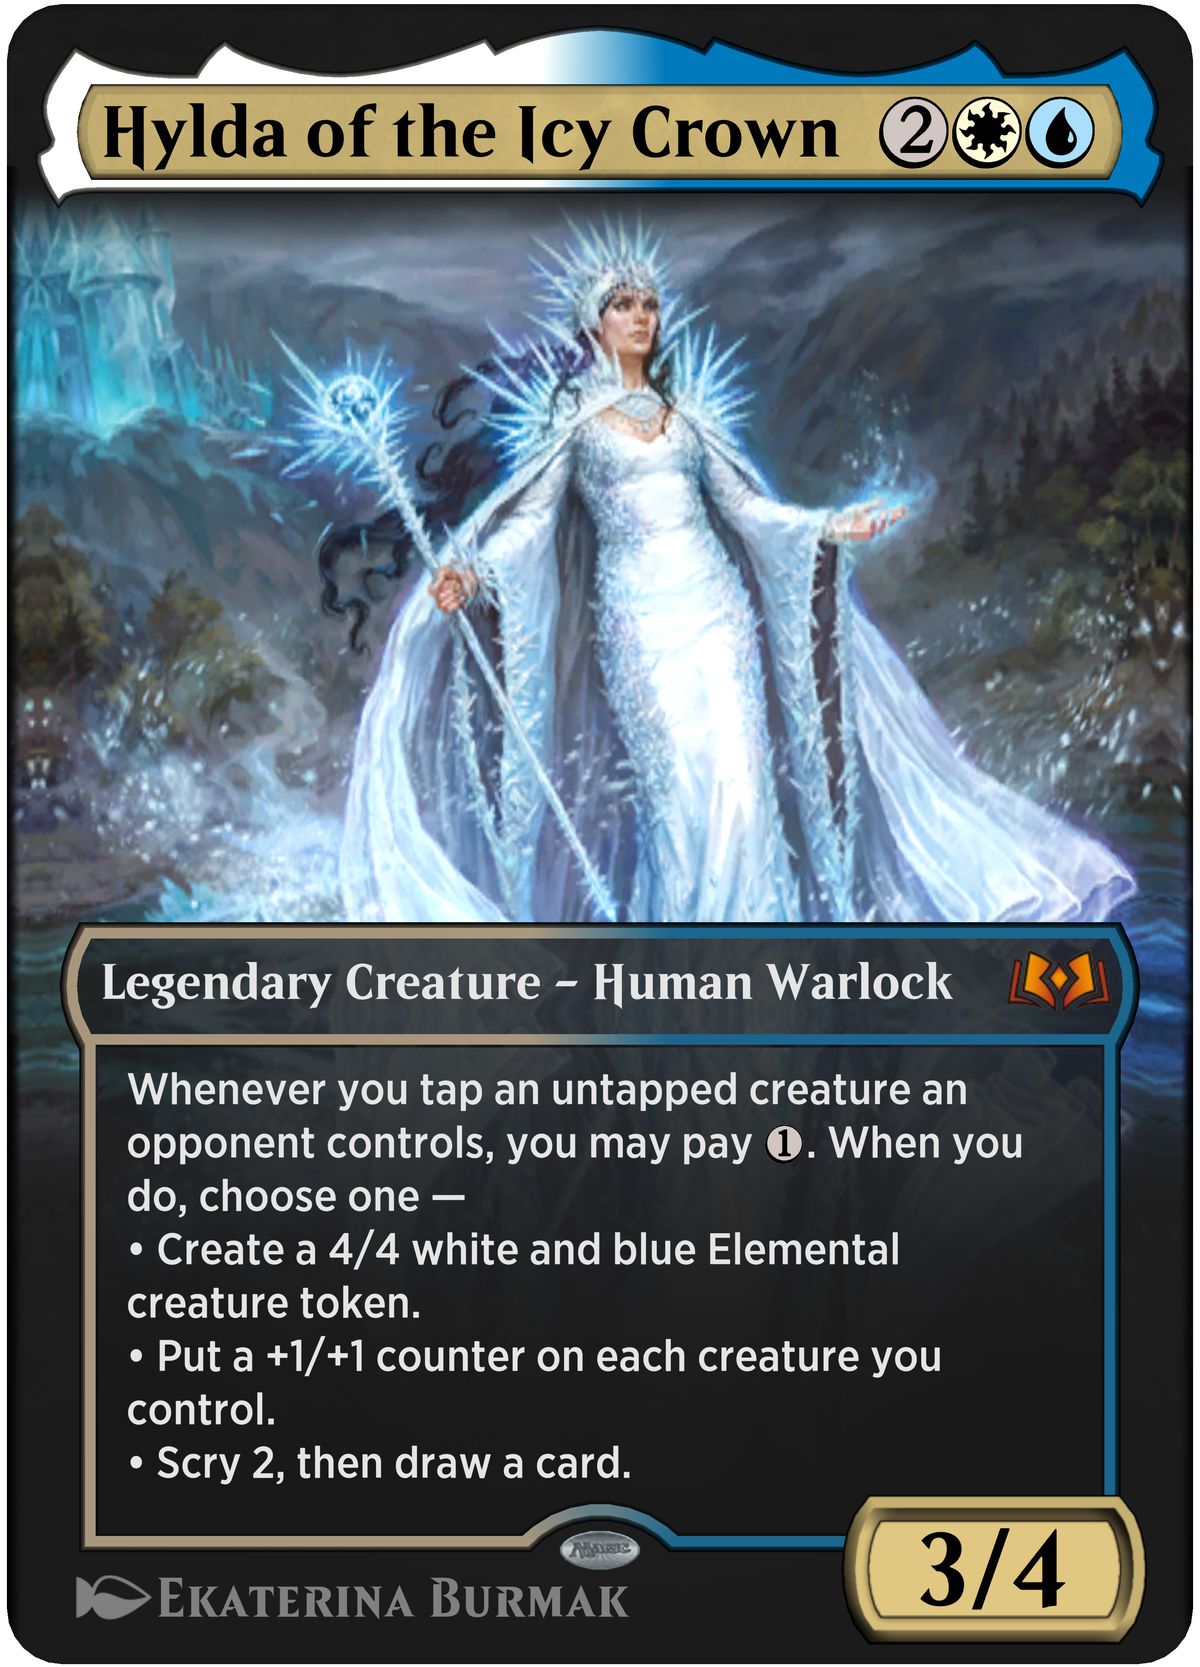 A snow queen, resplendent in her frosty cloths. Hylda of the Icy Crown is a legendary creature, a human warlock, with 3/4. The card costs two, with an additional one white and one blue mana, to play.